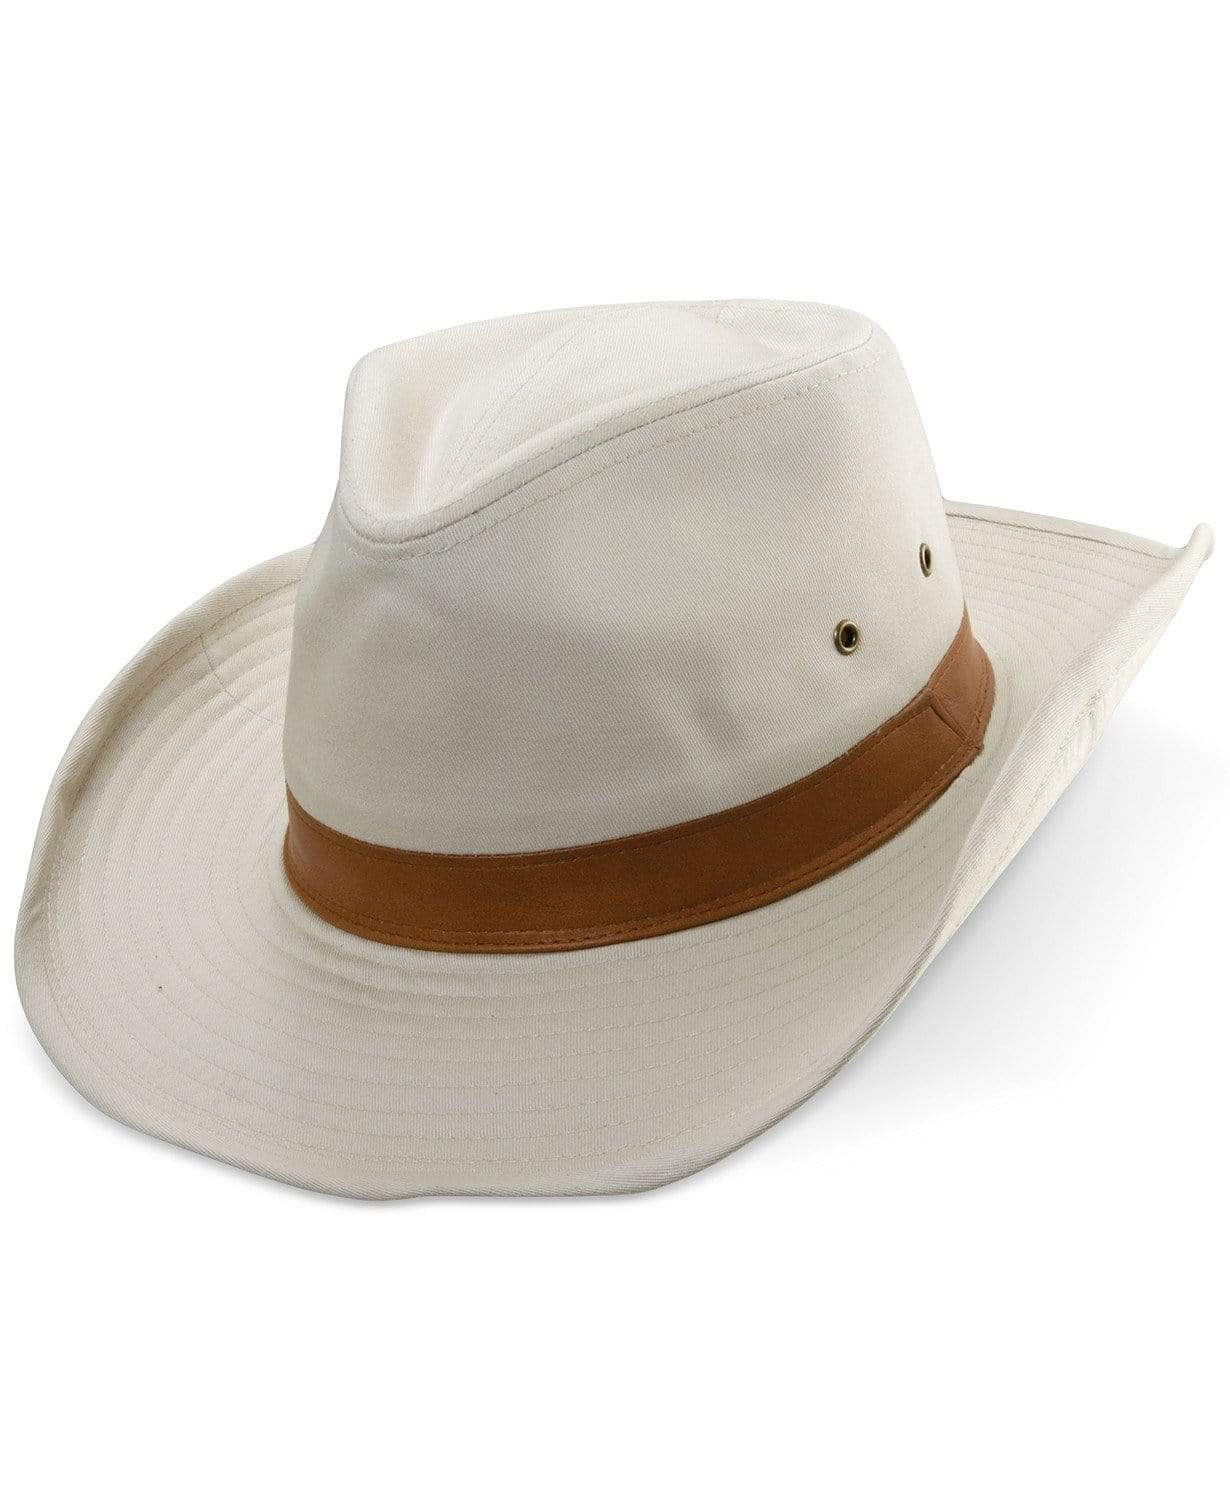 Dorfman Pacific Clothing Accessories One Size Garment-Washed Twill Shapable Outback Hat